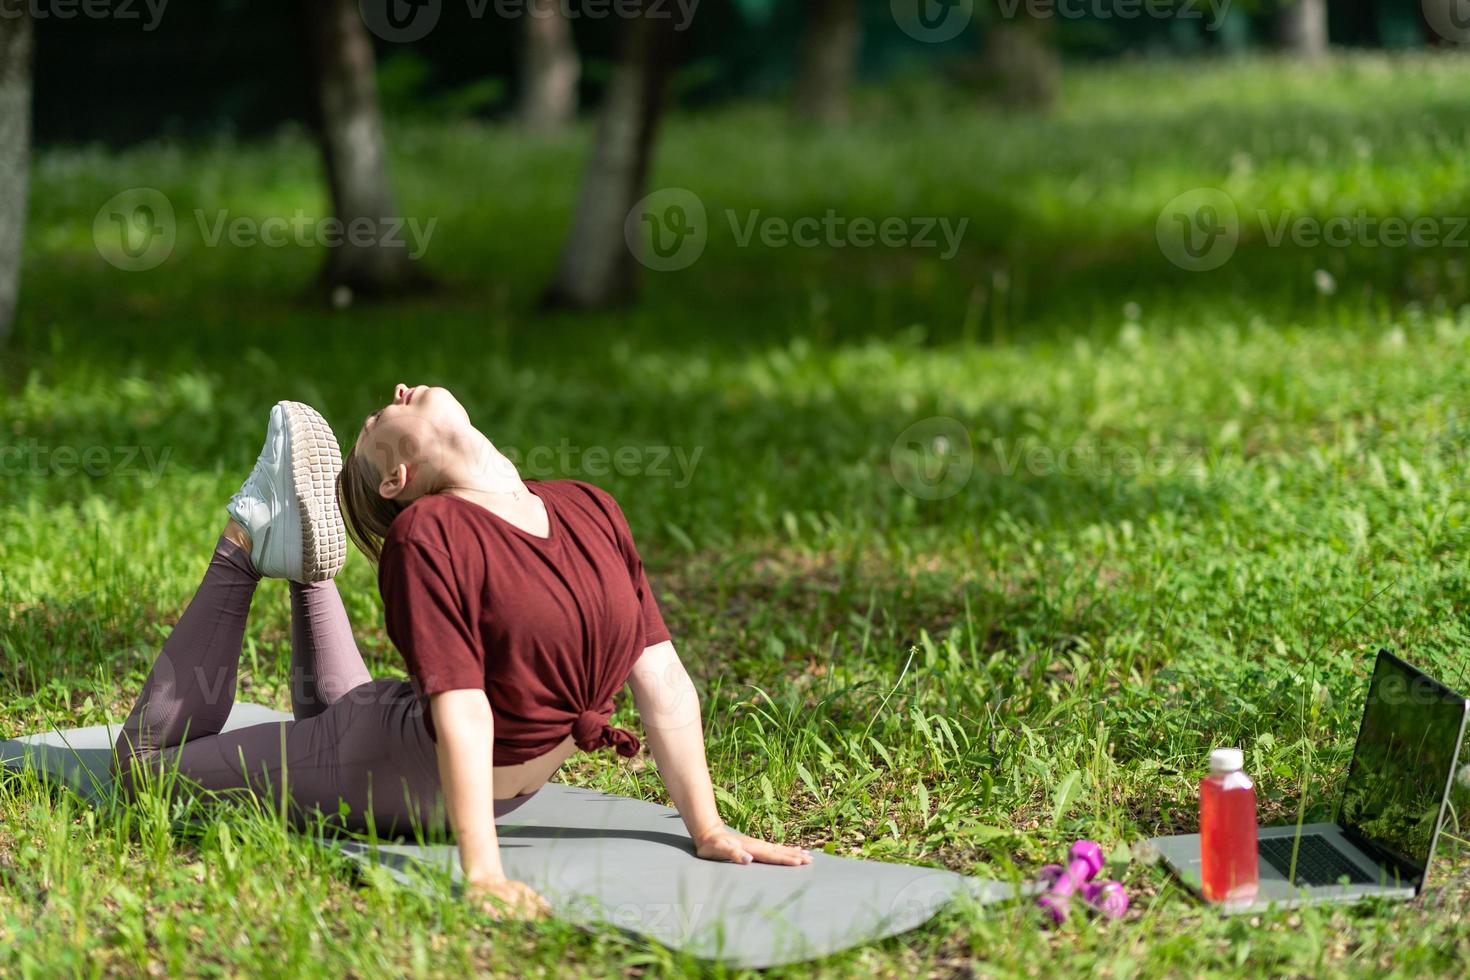 Young girl having online workout outdoors using laptop. Pilates or yoga video lesson on internet. Happy smiling girl practicing pilates lesson online in garden outdoors during quarantine. photo